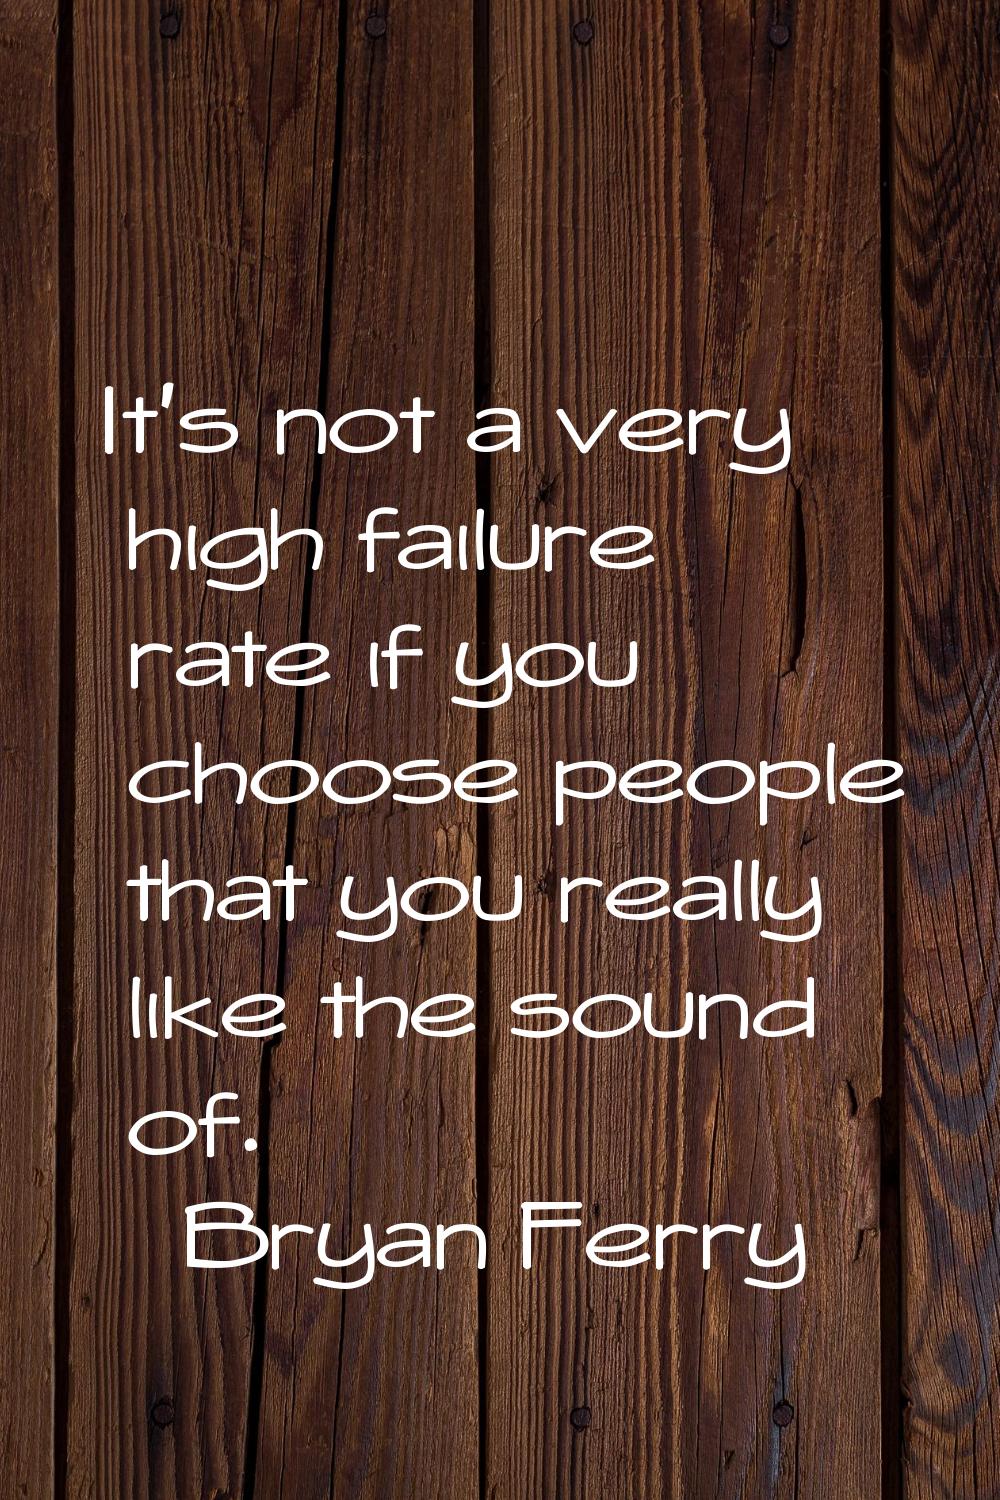 It's not a very high failure rate if you choose people that you really like the sound of.